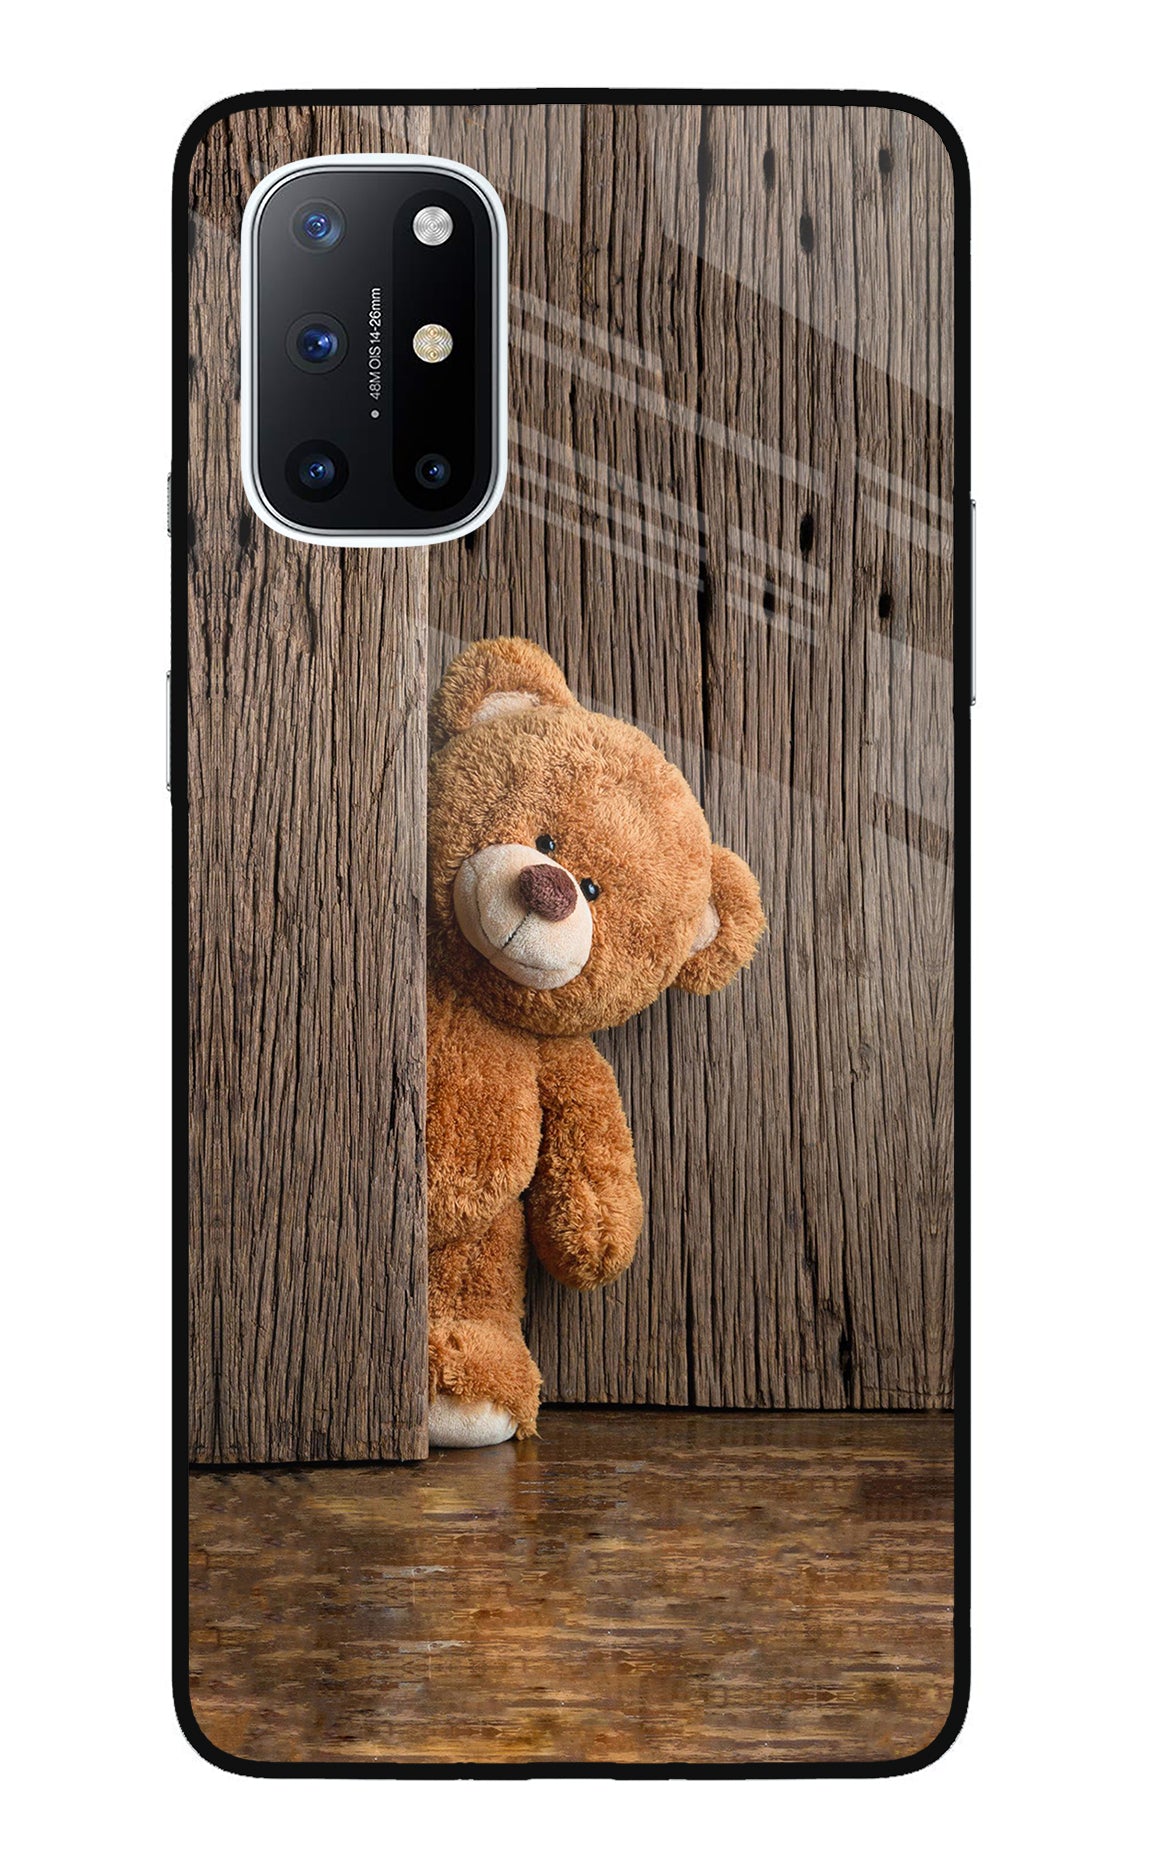 Teddy Wooden Oneplus 8T Back Cover